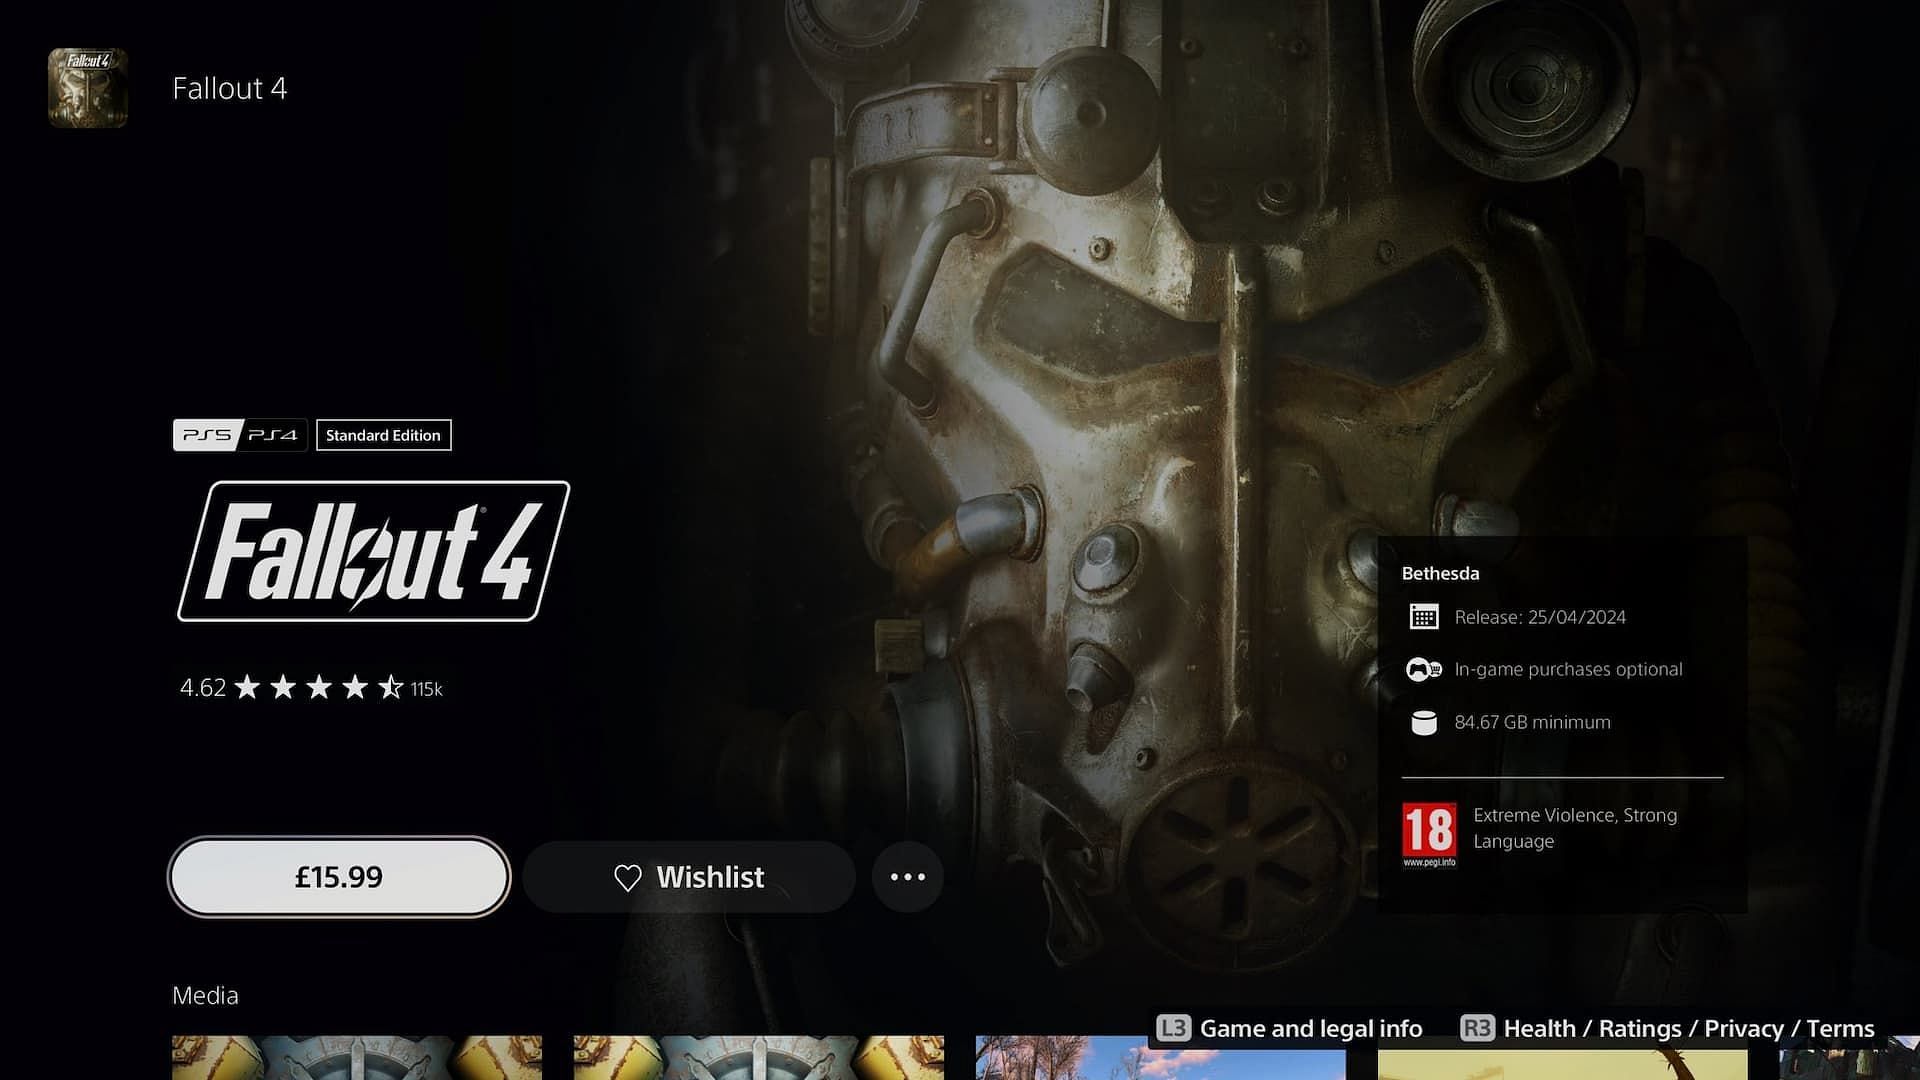 Fallout 4 Next-gen update is demanding money from PS Plus users (Image via PlayStation Store)